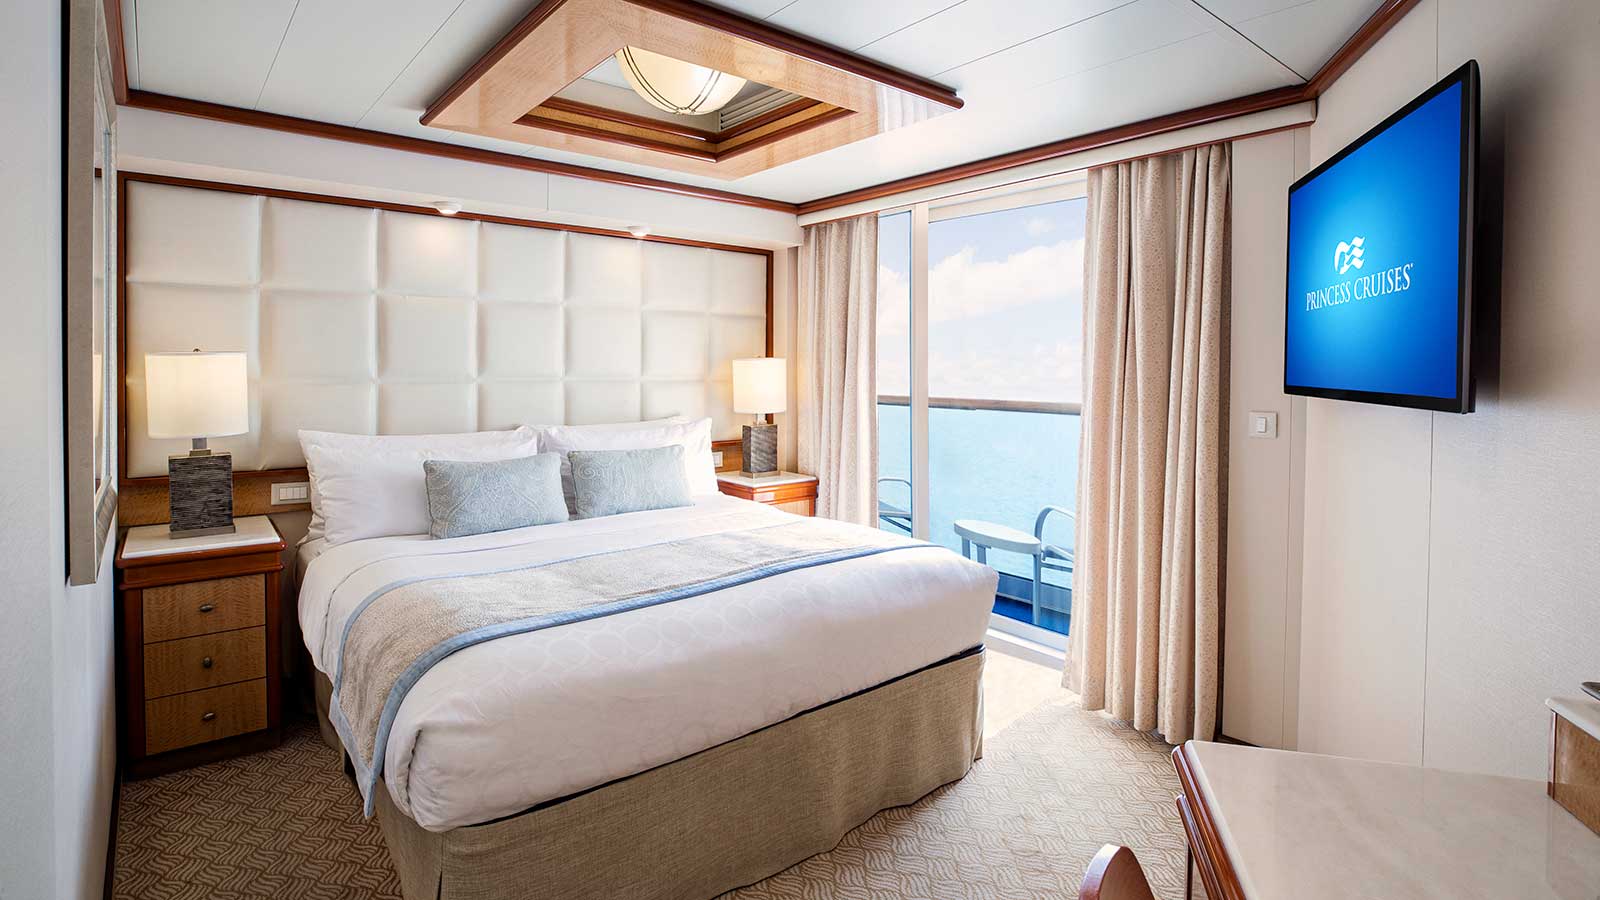 Image of Suite Accommodation, sourced from: Princess Cruise Lines https://www.princess.com/images/global/ships-and-experience/ships/products/staterooms/royal-class-suite-1600.jpg